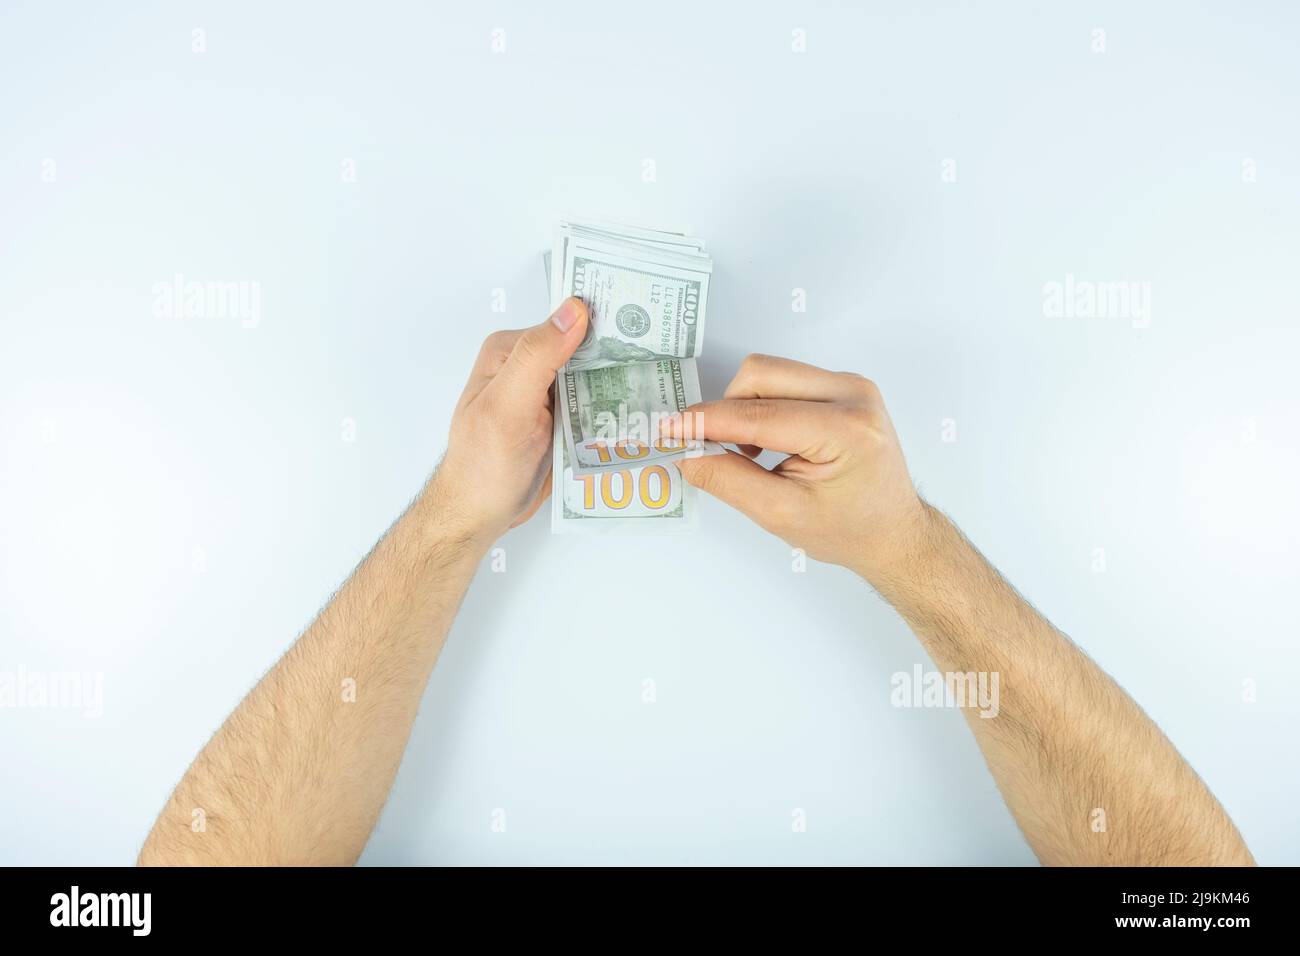 Man counting money with hand, top view, isolated on white background, counting dollar banknotes, wealth concept, make money idea, cash money on hand Stock Photo